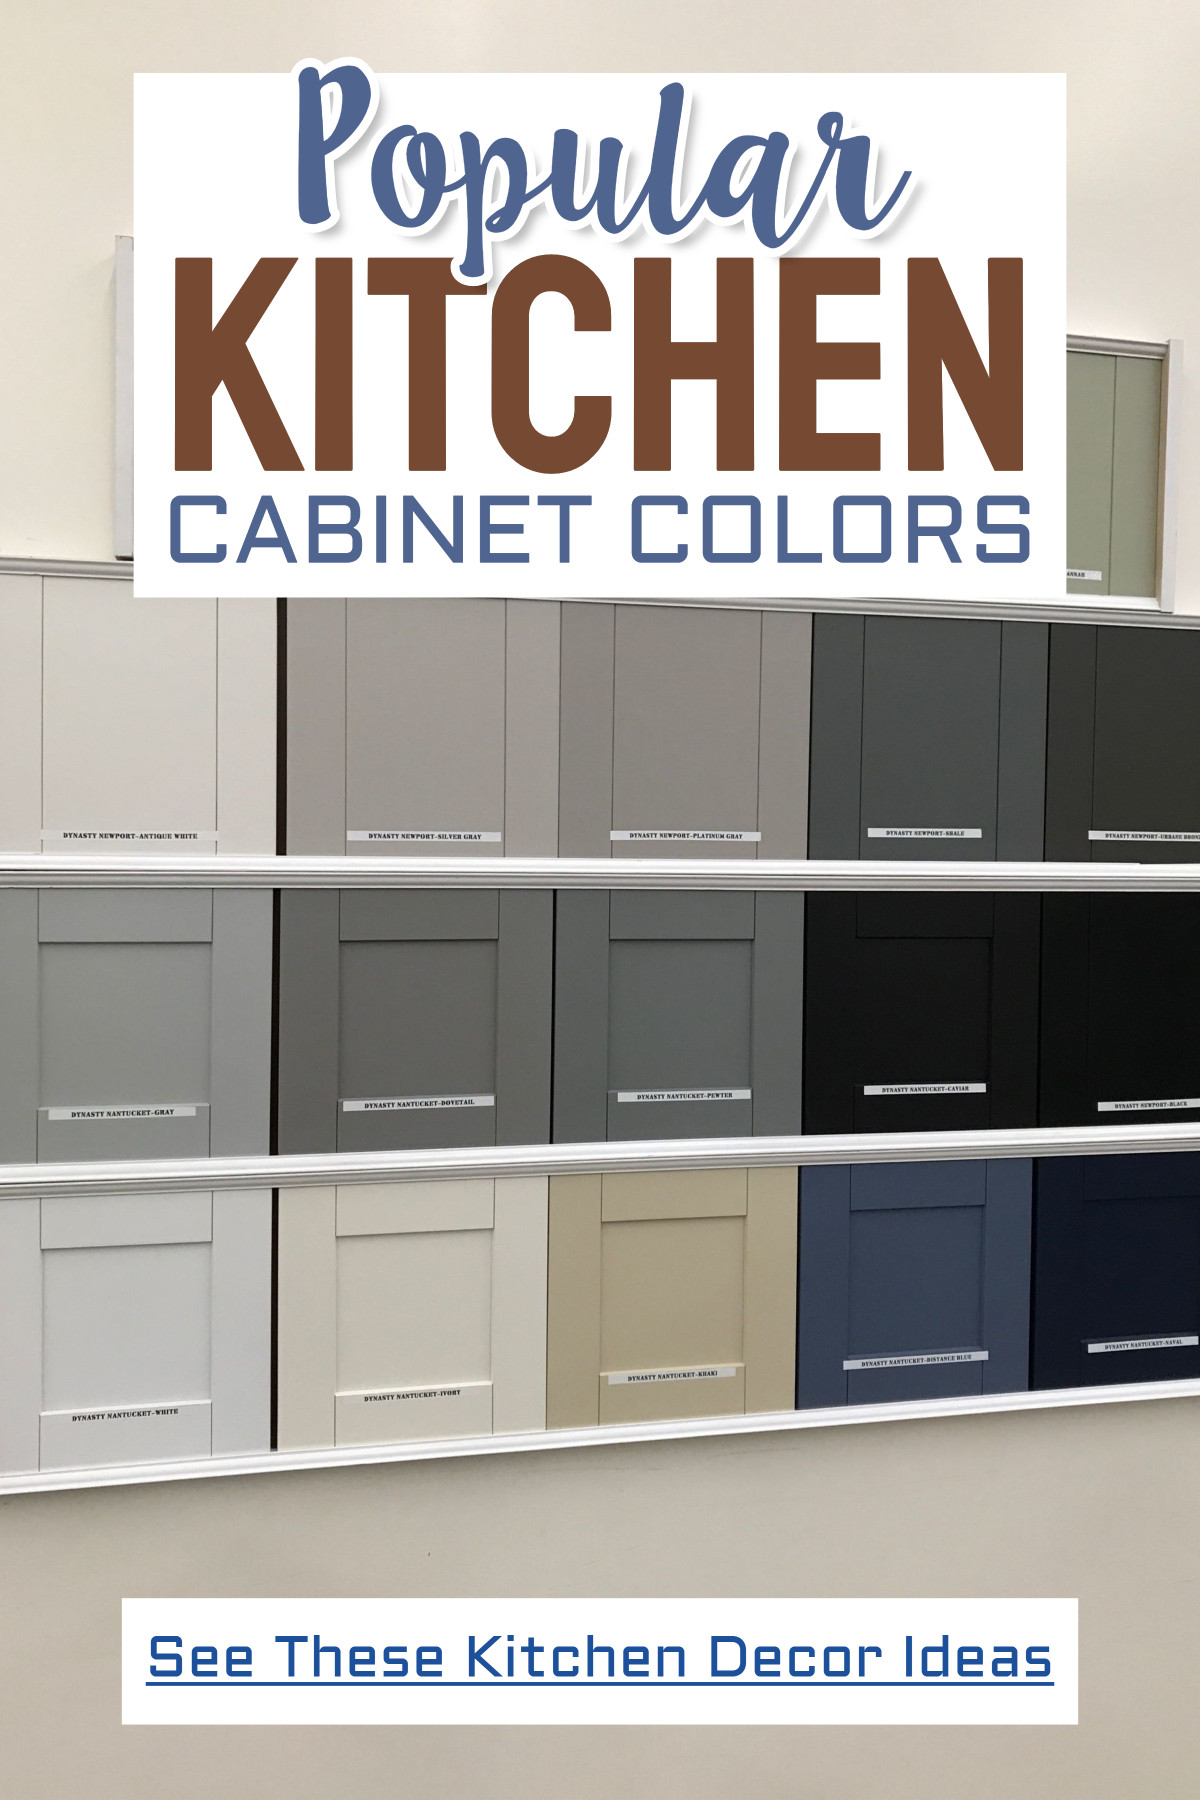 Popular kitchen cabinet color schemes for painting kitchen cabinets